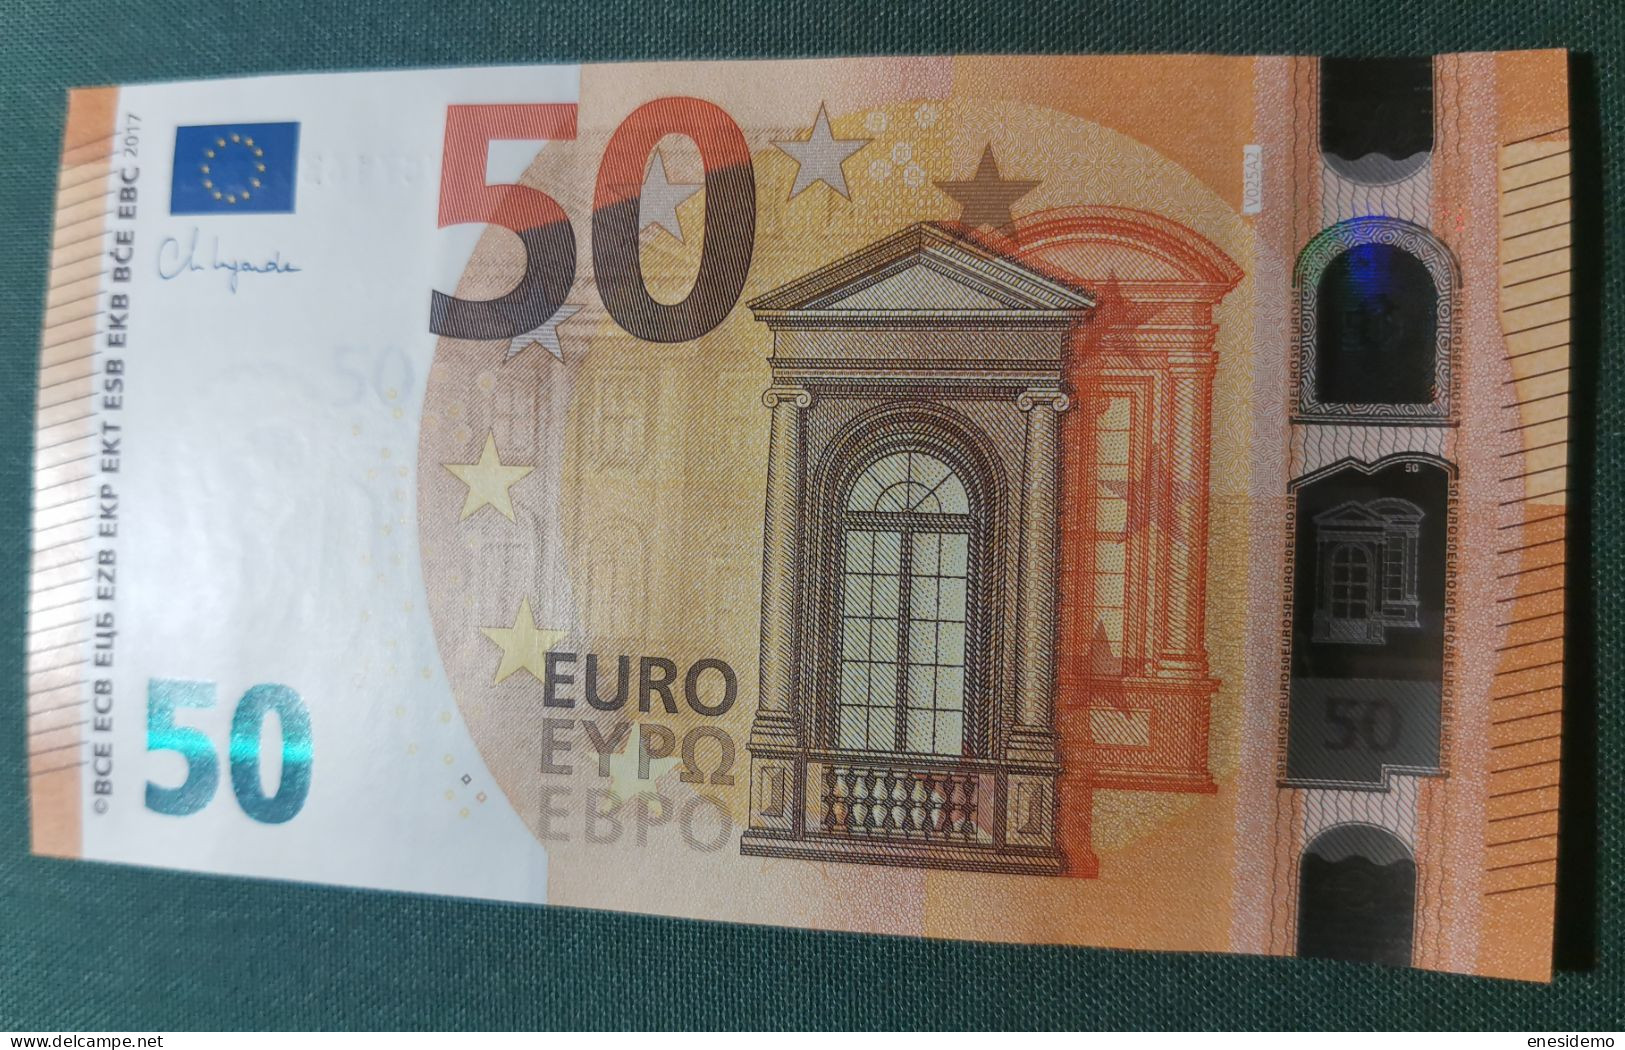 50 EURO SPAIN 2017 LAGARDE V025A2 VC SC FDS UNCIRCULATED PERFECT